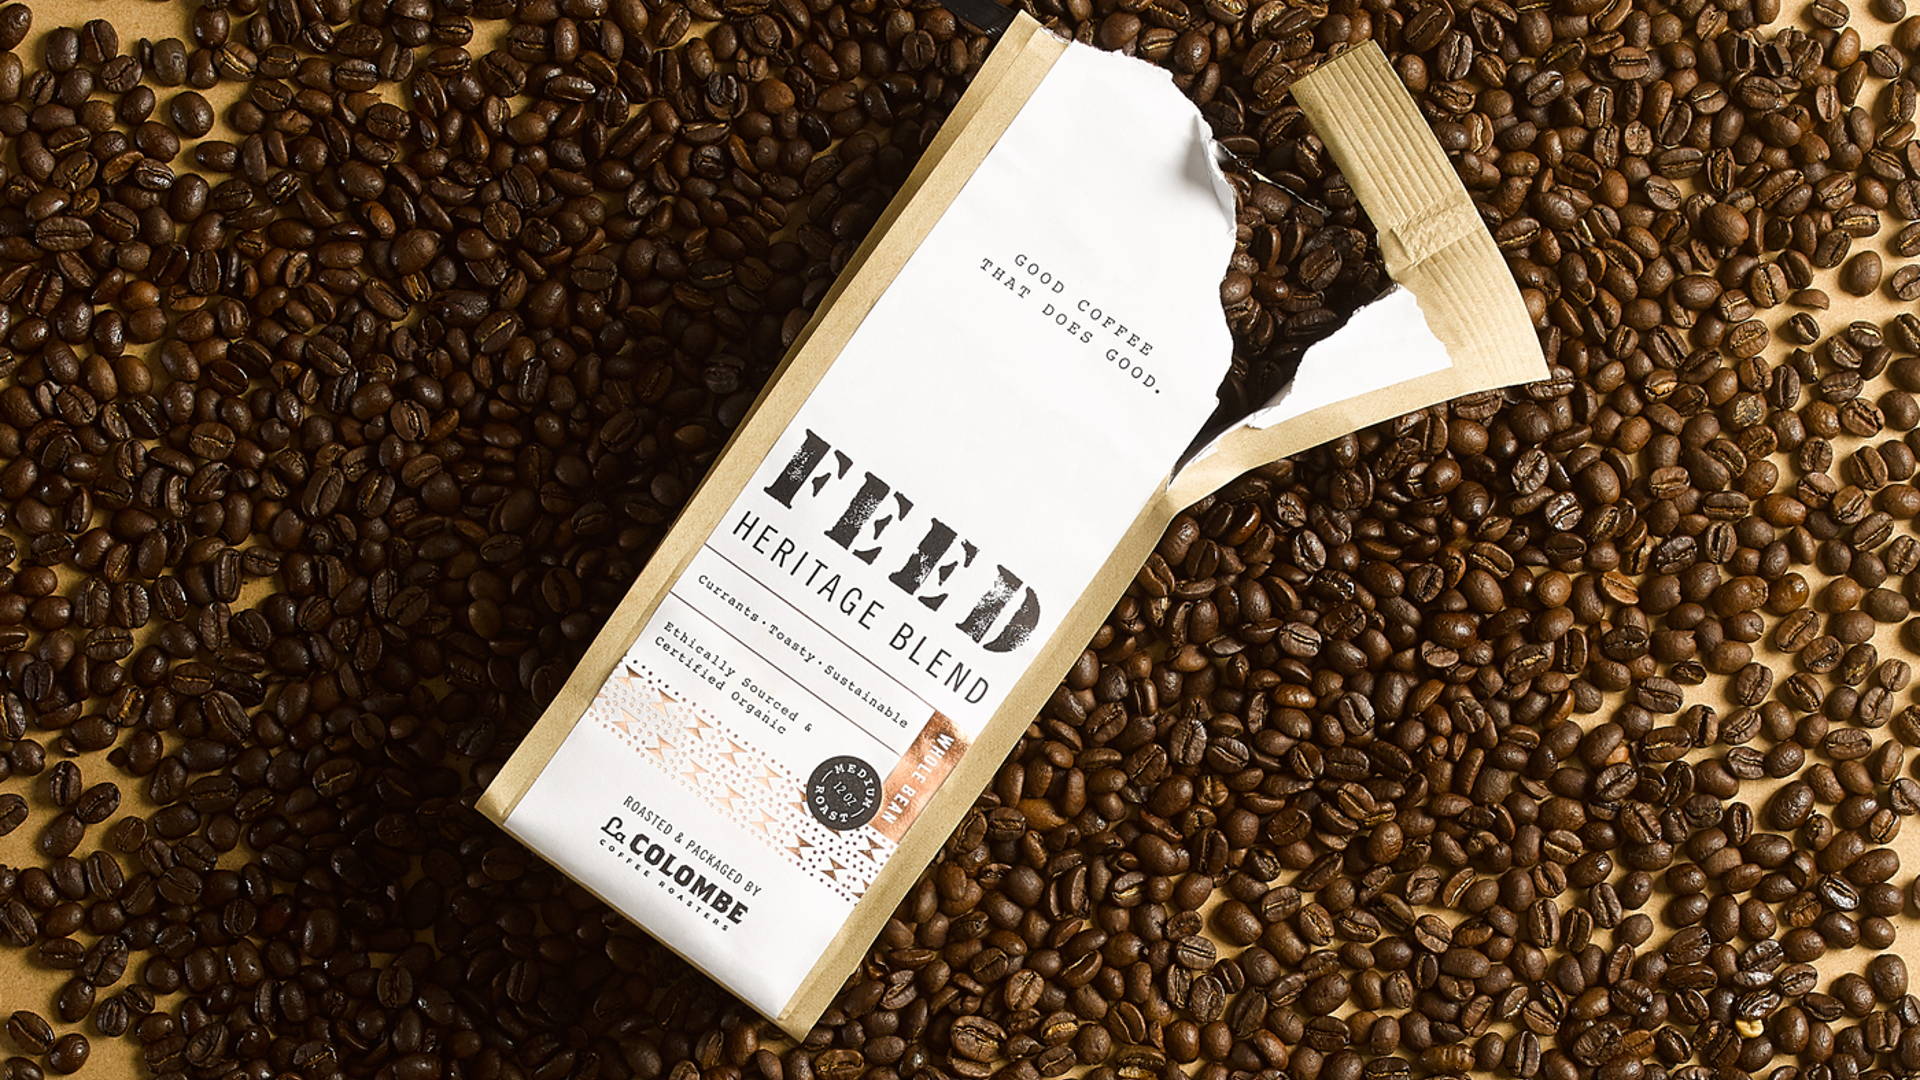 Featured image for FEED’s Coffee is Good and Also Does Good